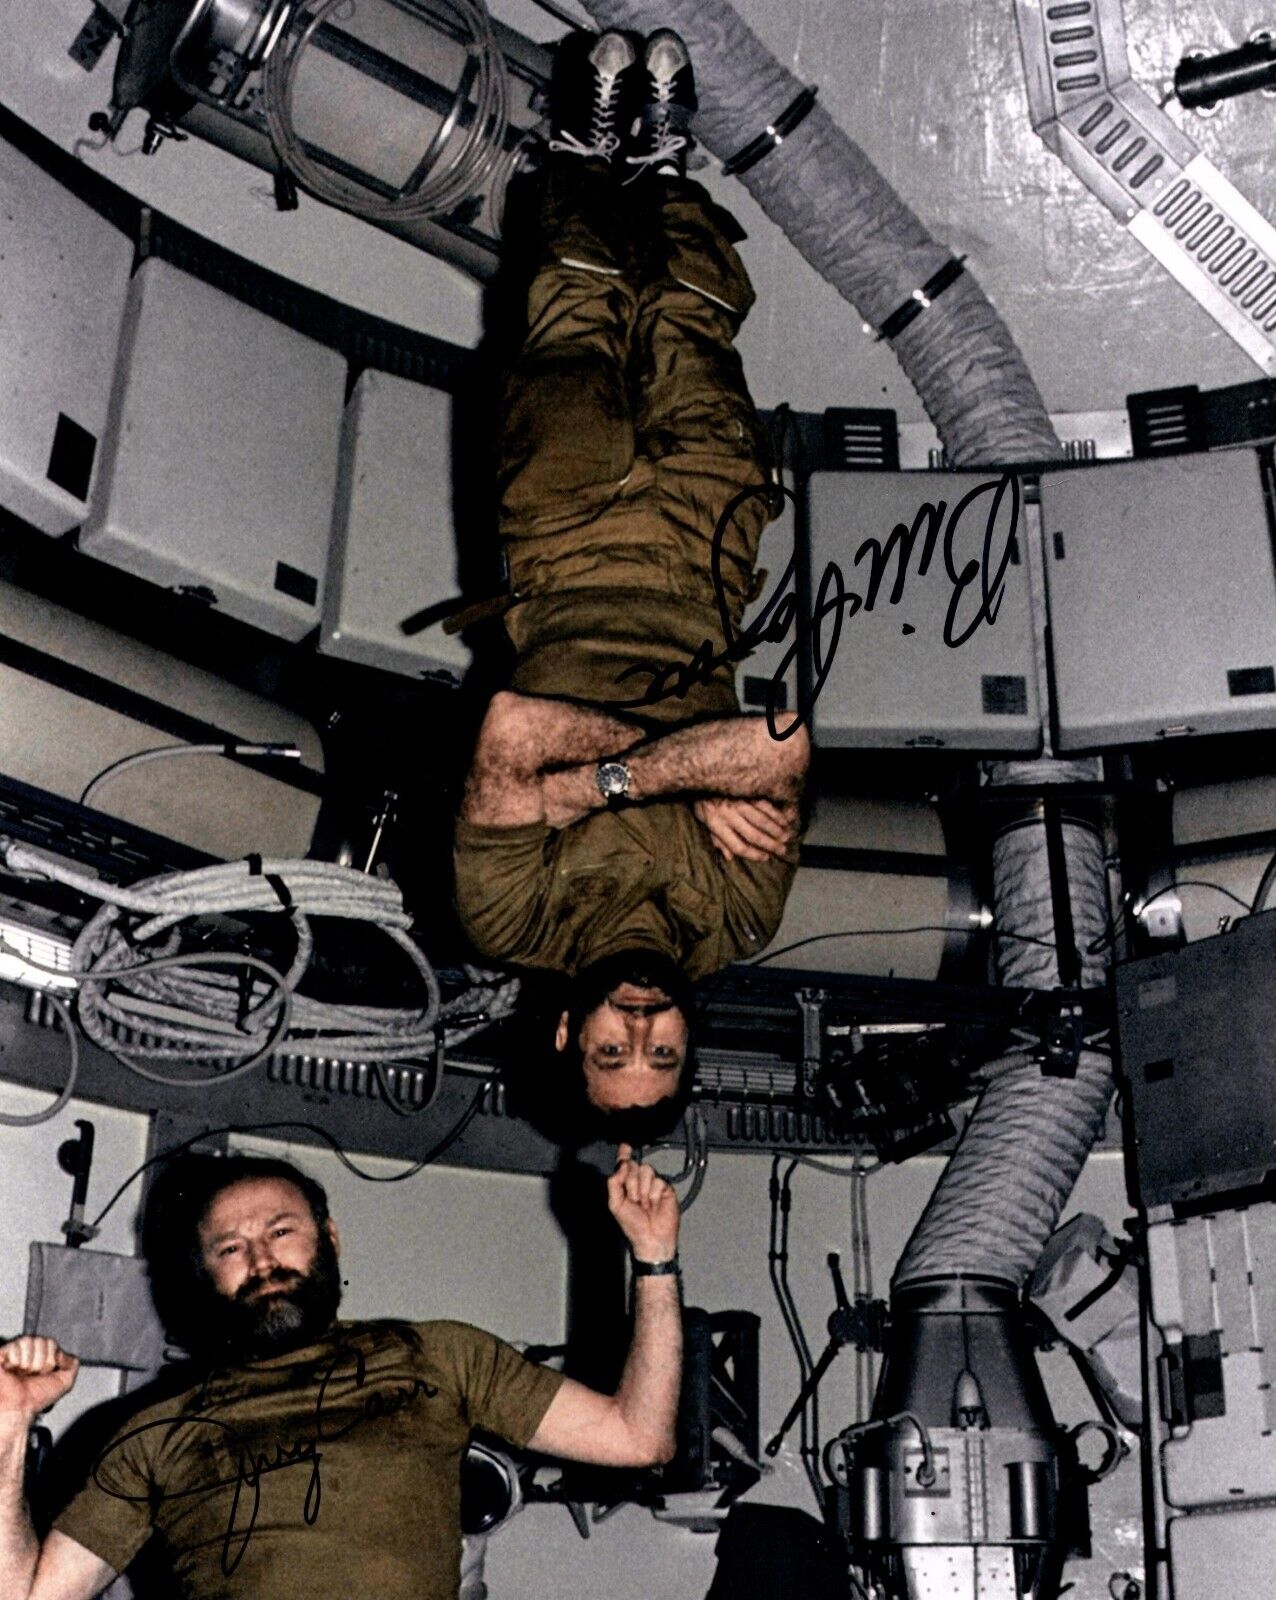 Skylab 4 Astronauts Jerry Carr and Bill Pogue Autographed Weightless Photograph